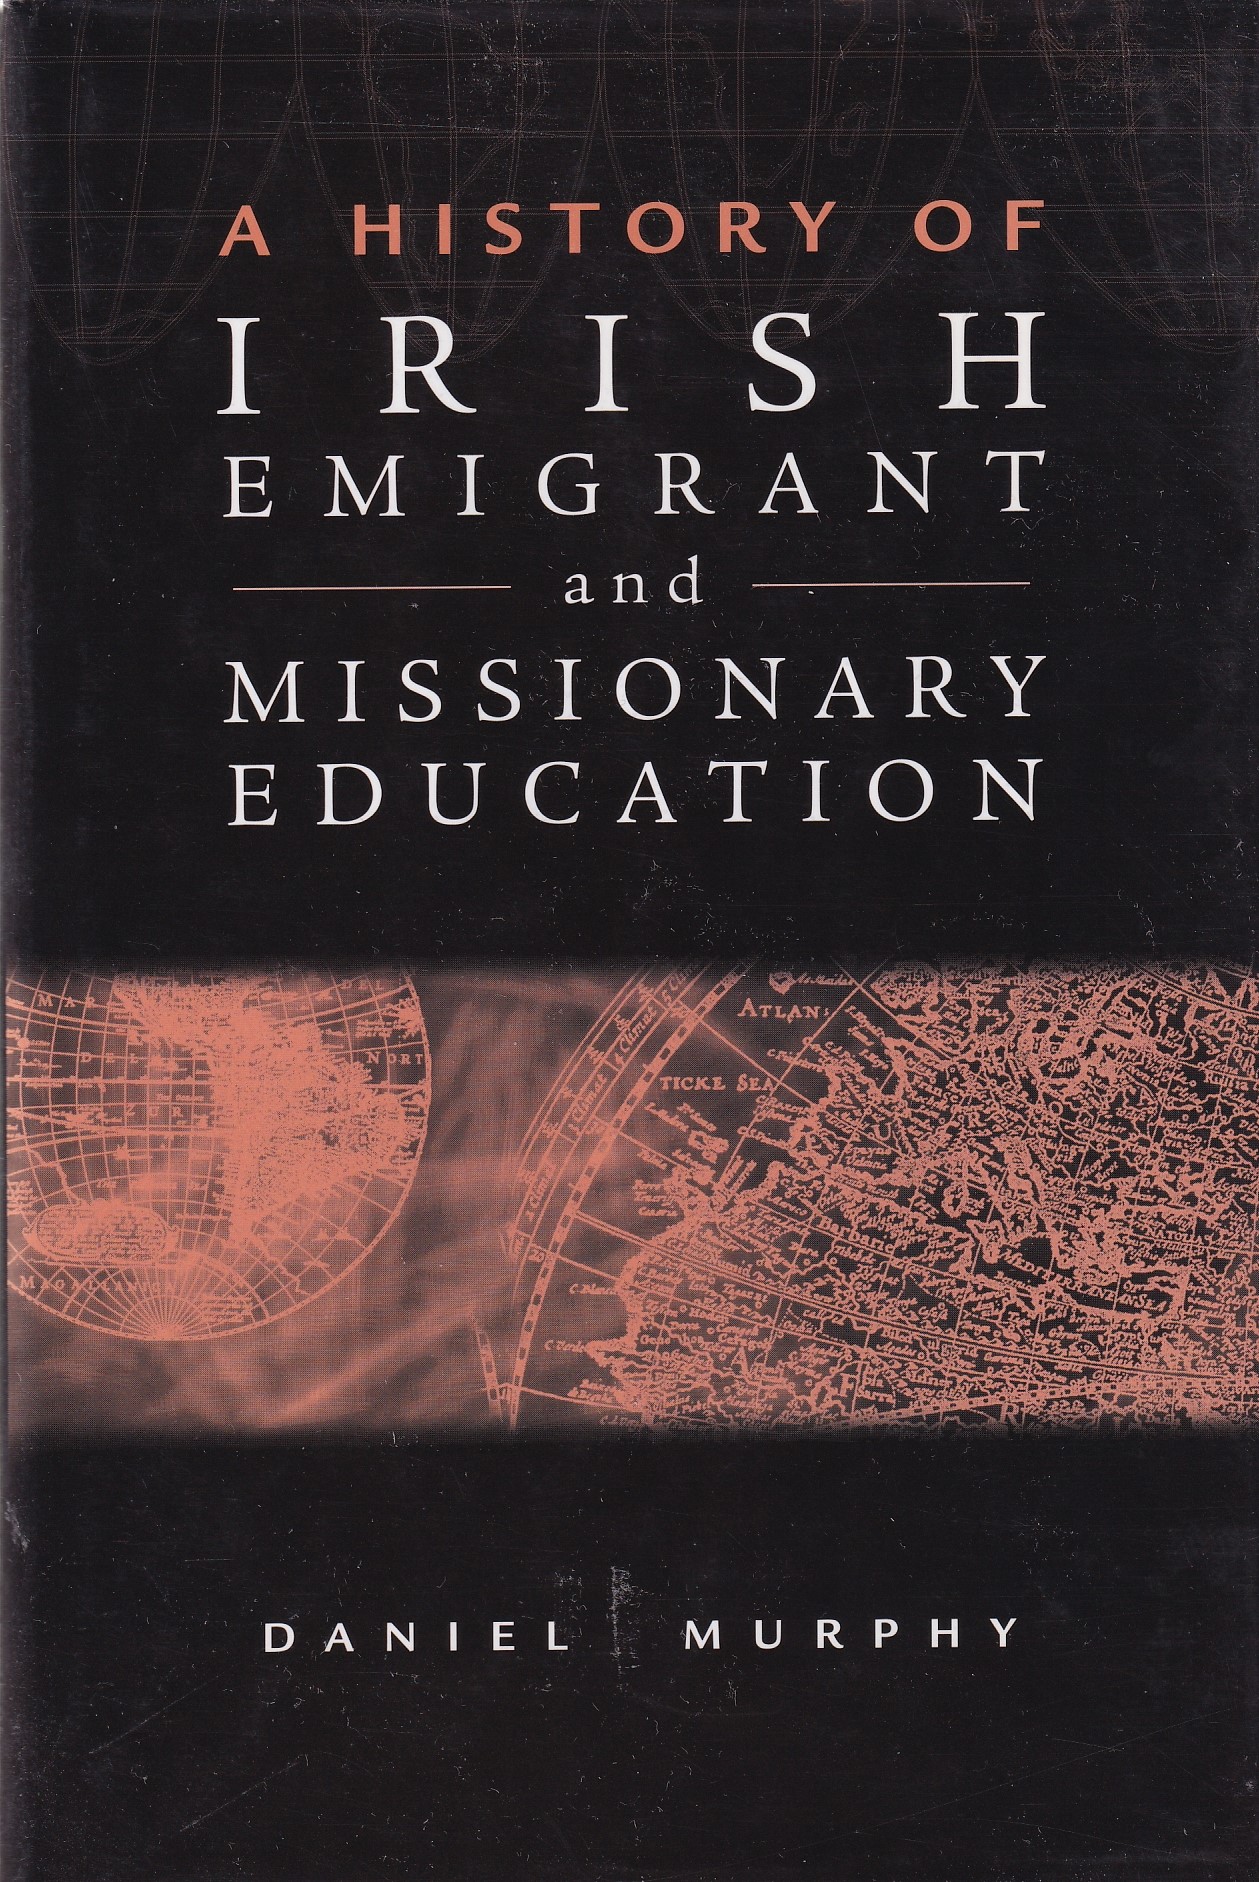 Irish Emigrant and Missionary Education: A History | Daniel Murphy | Charlie Byrne's